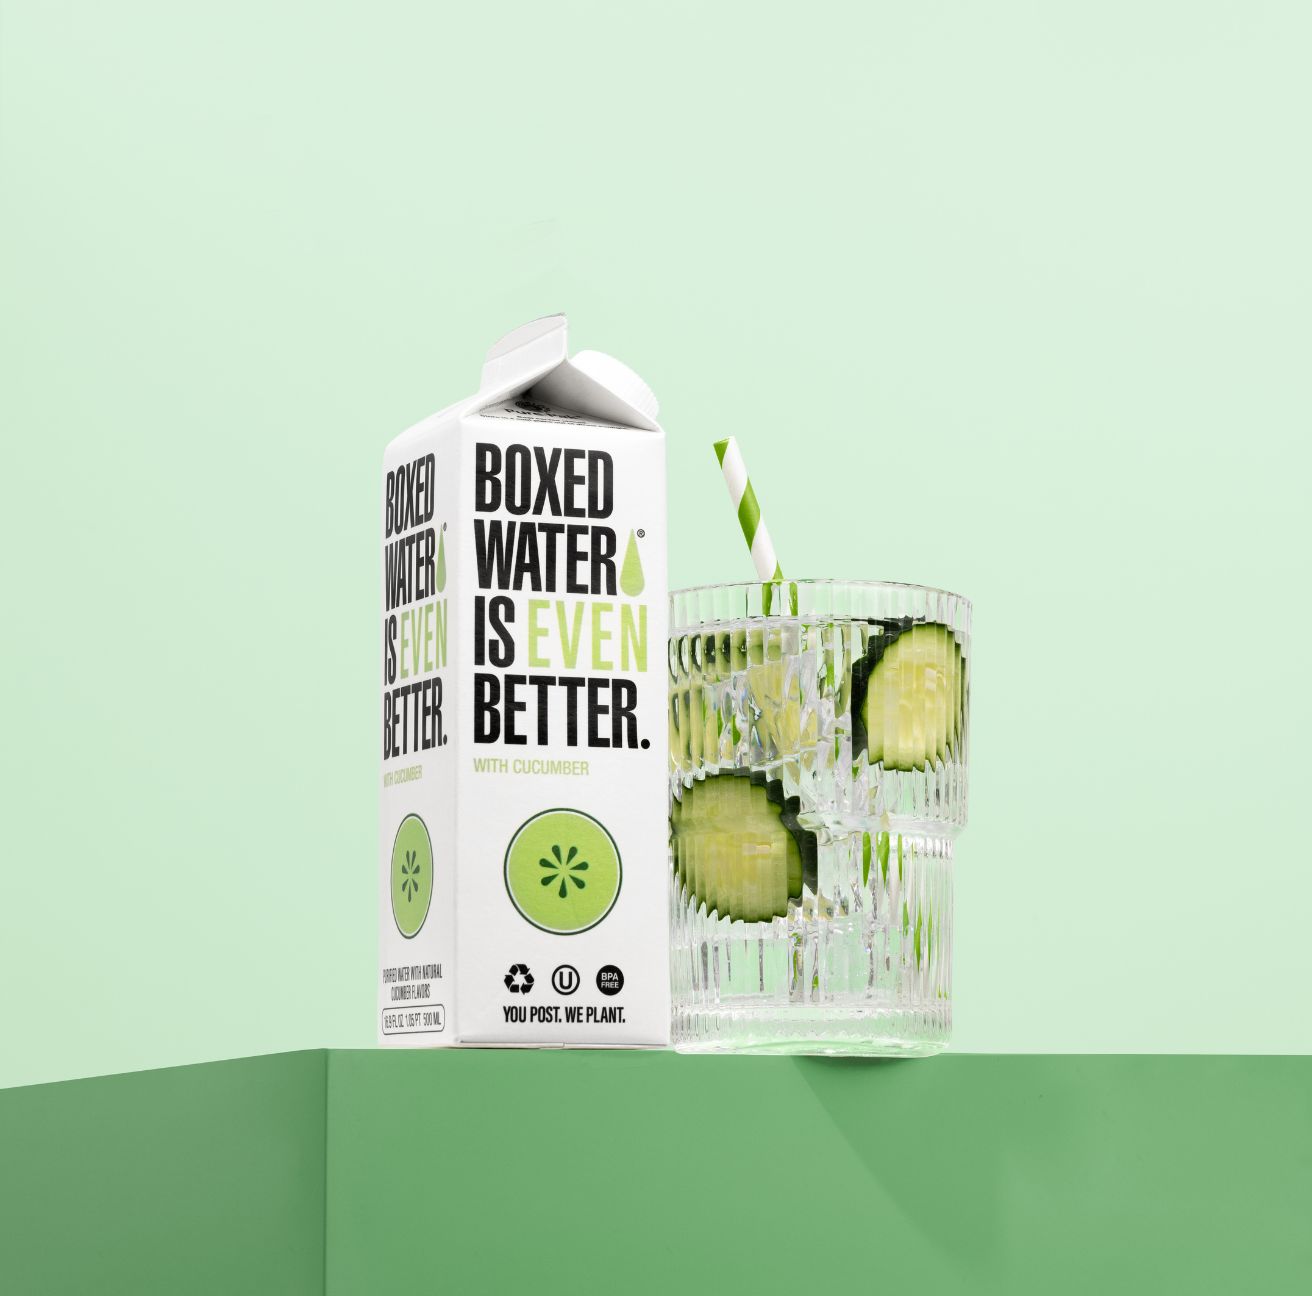 A box and glass of Cucumber Boxed Water in front of a green background